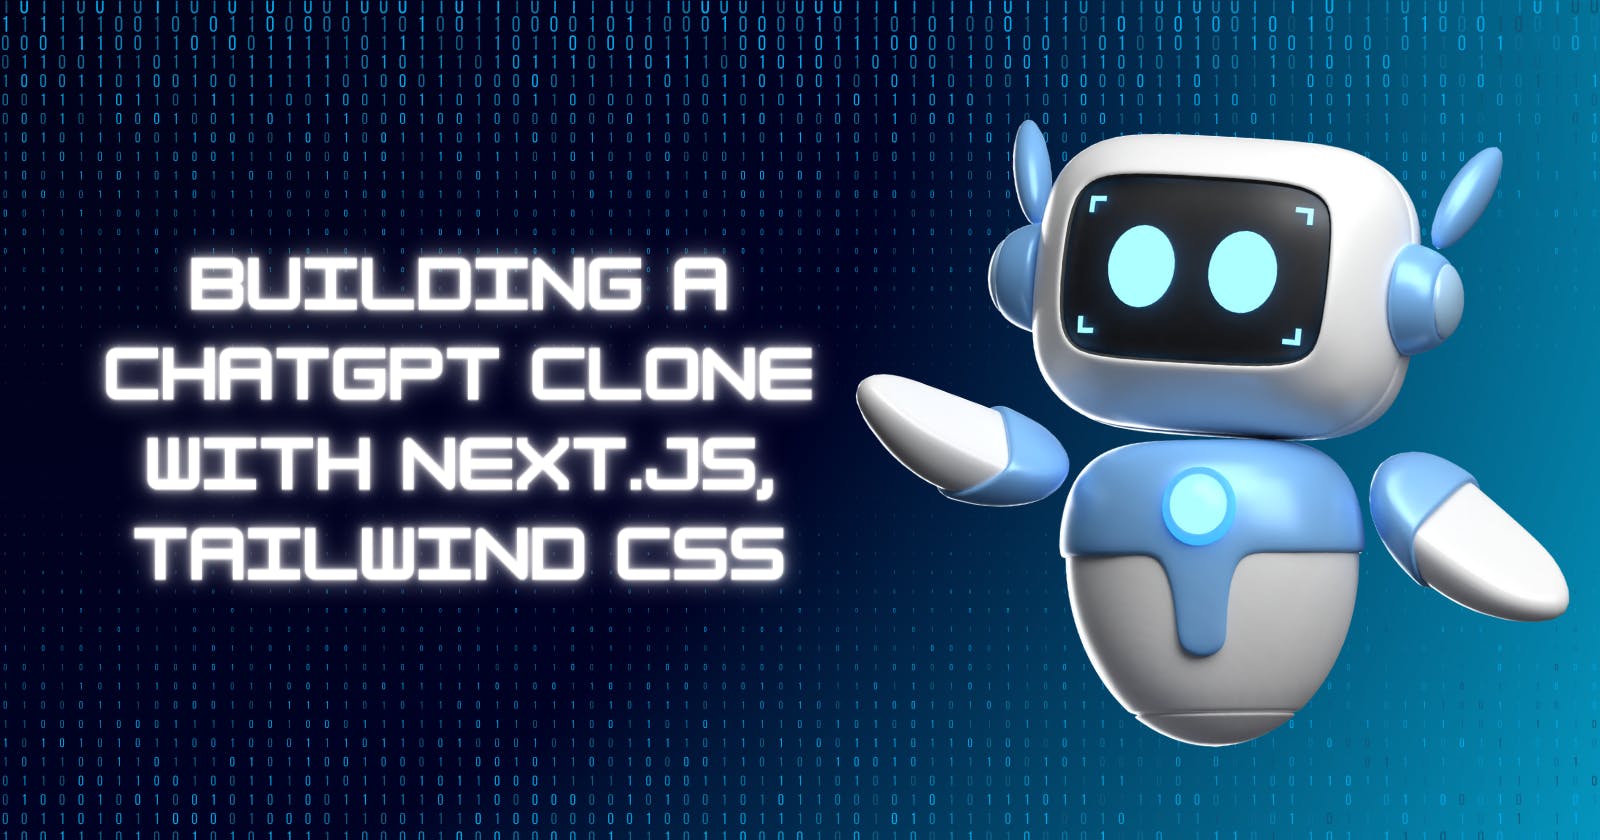 Building a ChatGPT Clone with Next.js, Tailwind CSS